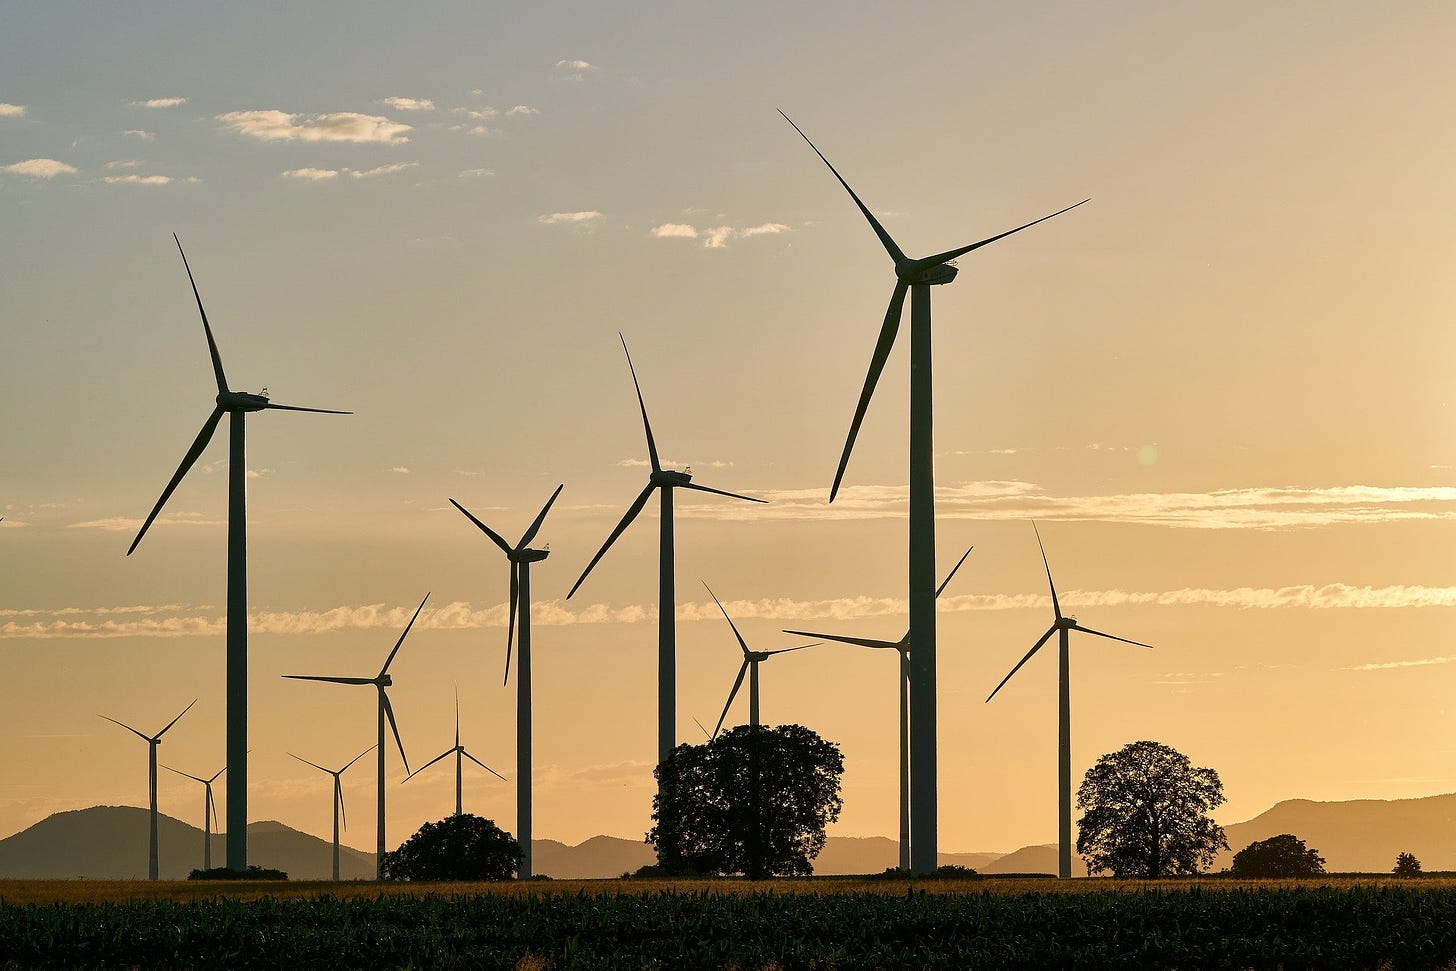 Wind turbines in an idyllic scene with mist on the ground and sunrise off the to right.